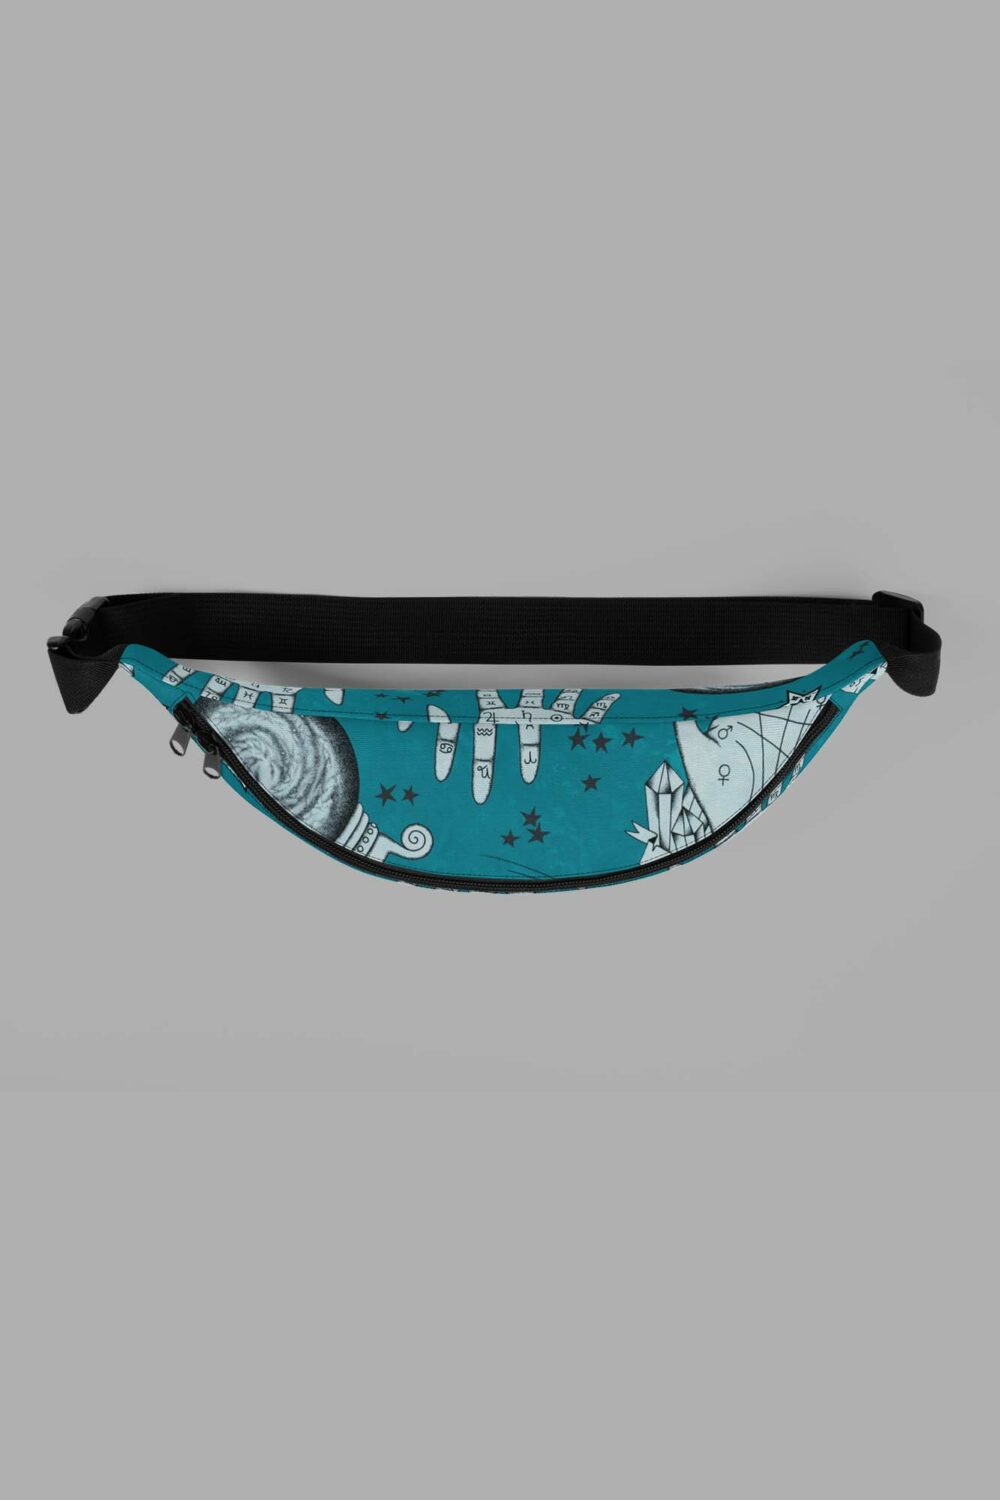 cosmic drifters clairvoyant print fanny pack top